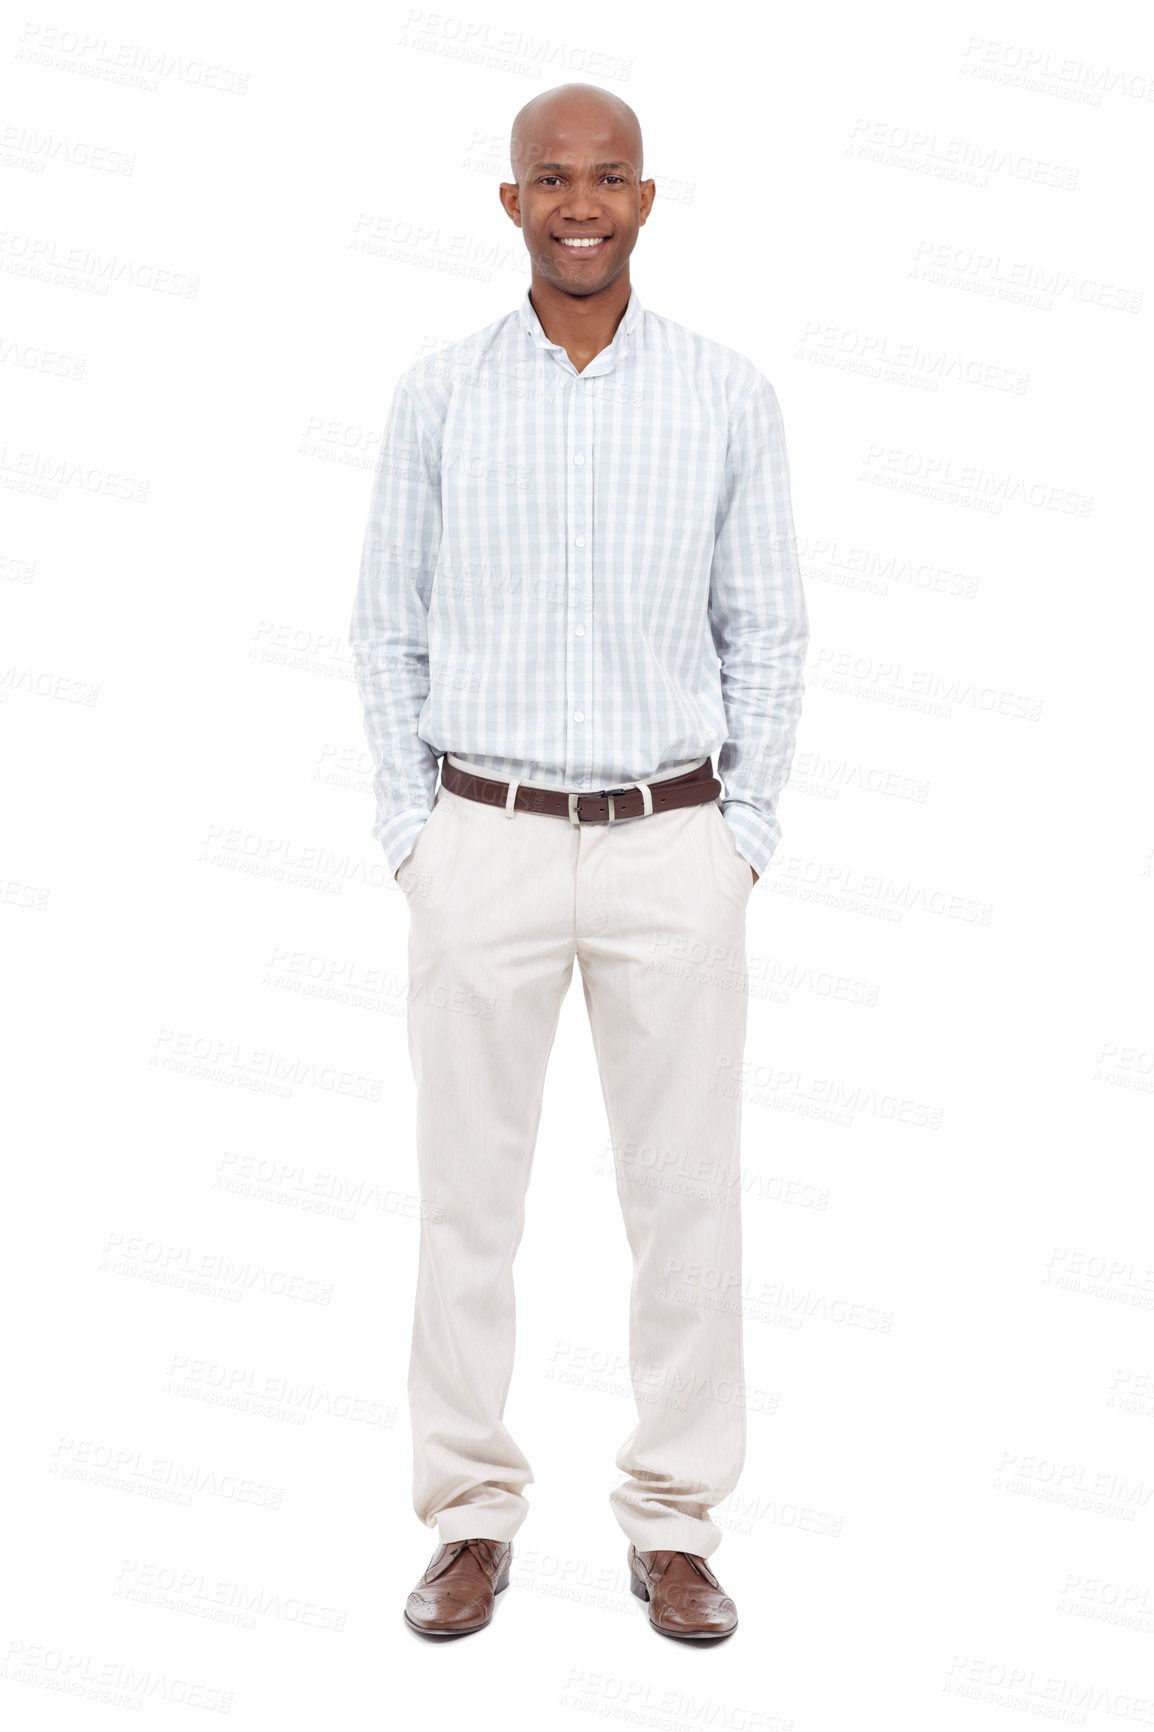 Buy stock photo Full length studio portrait of a young african american man dressed casually and standing with his hands in his pockets
